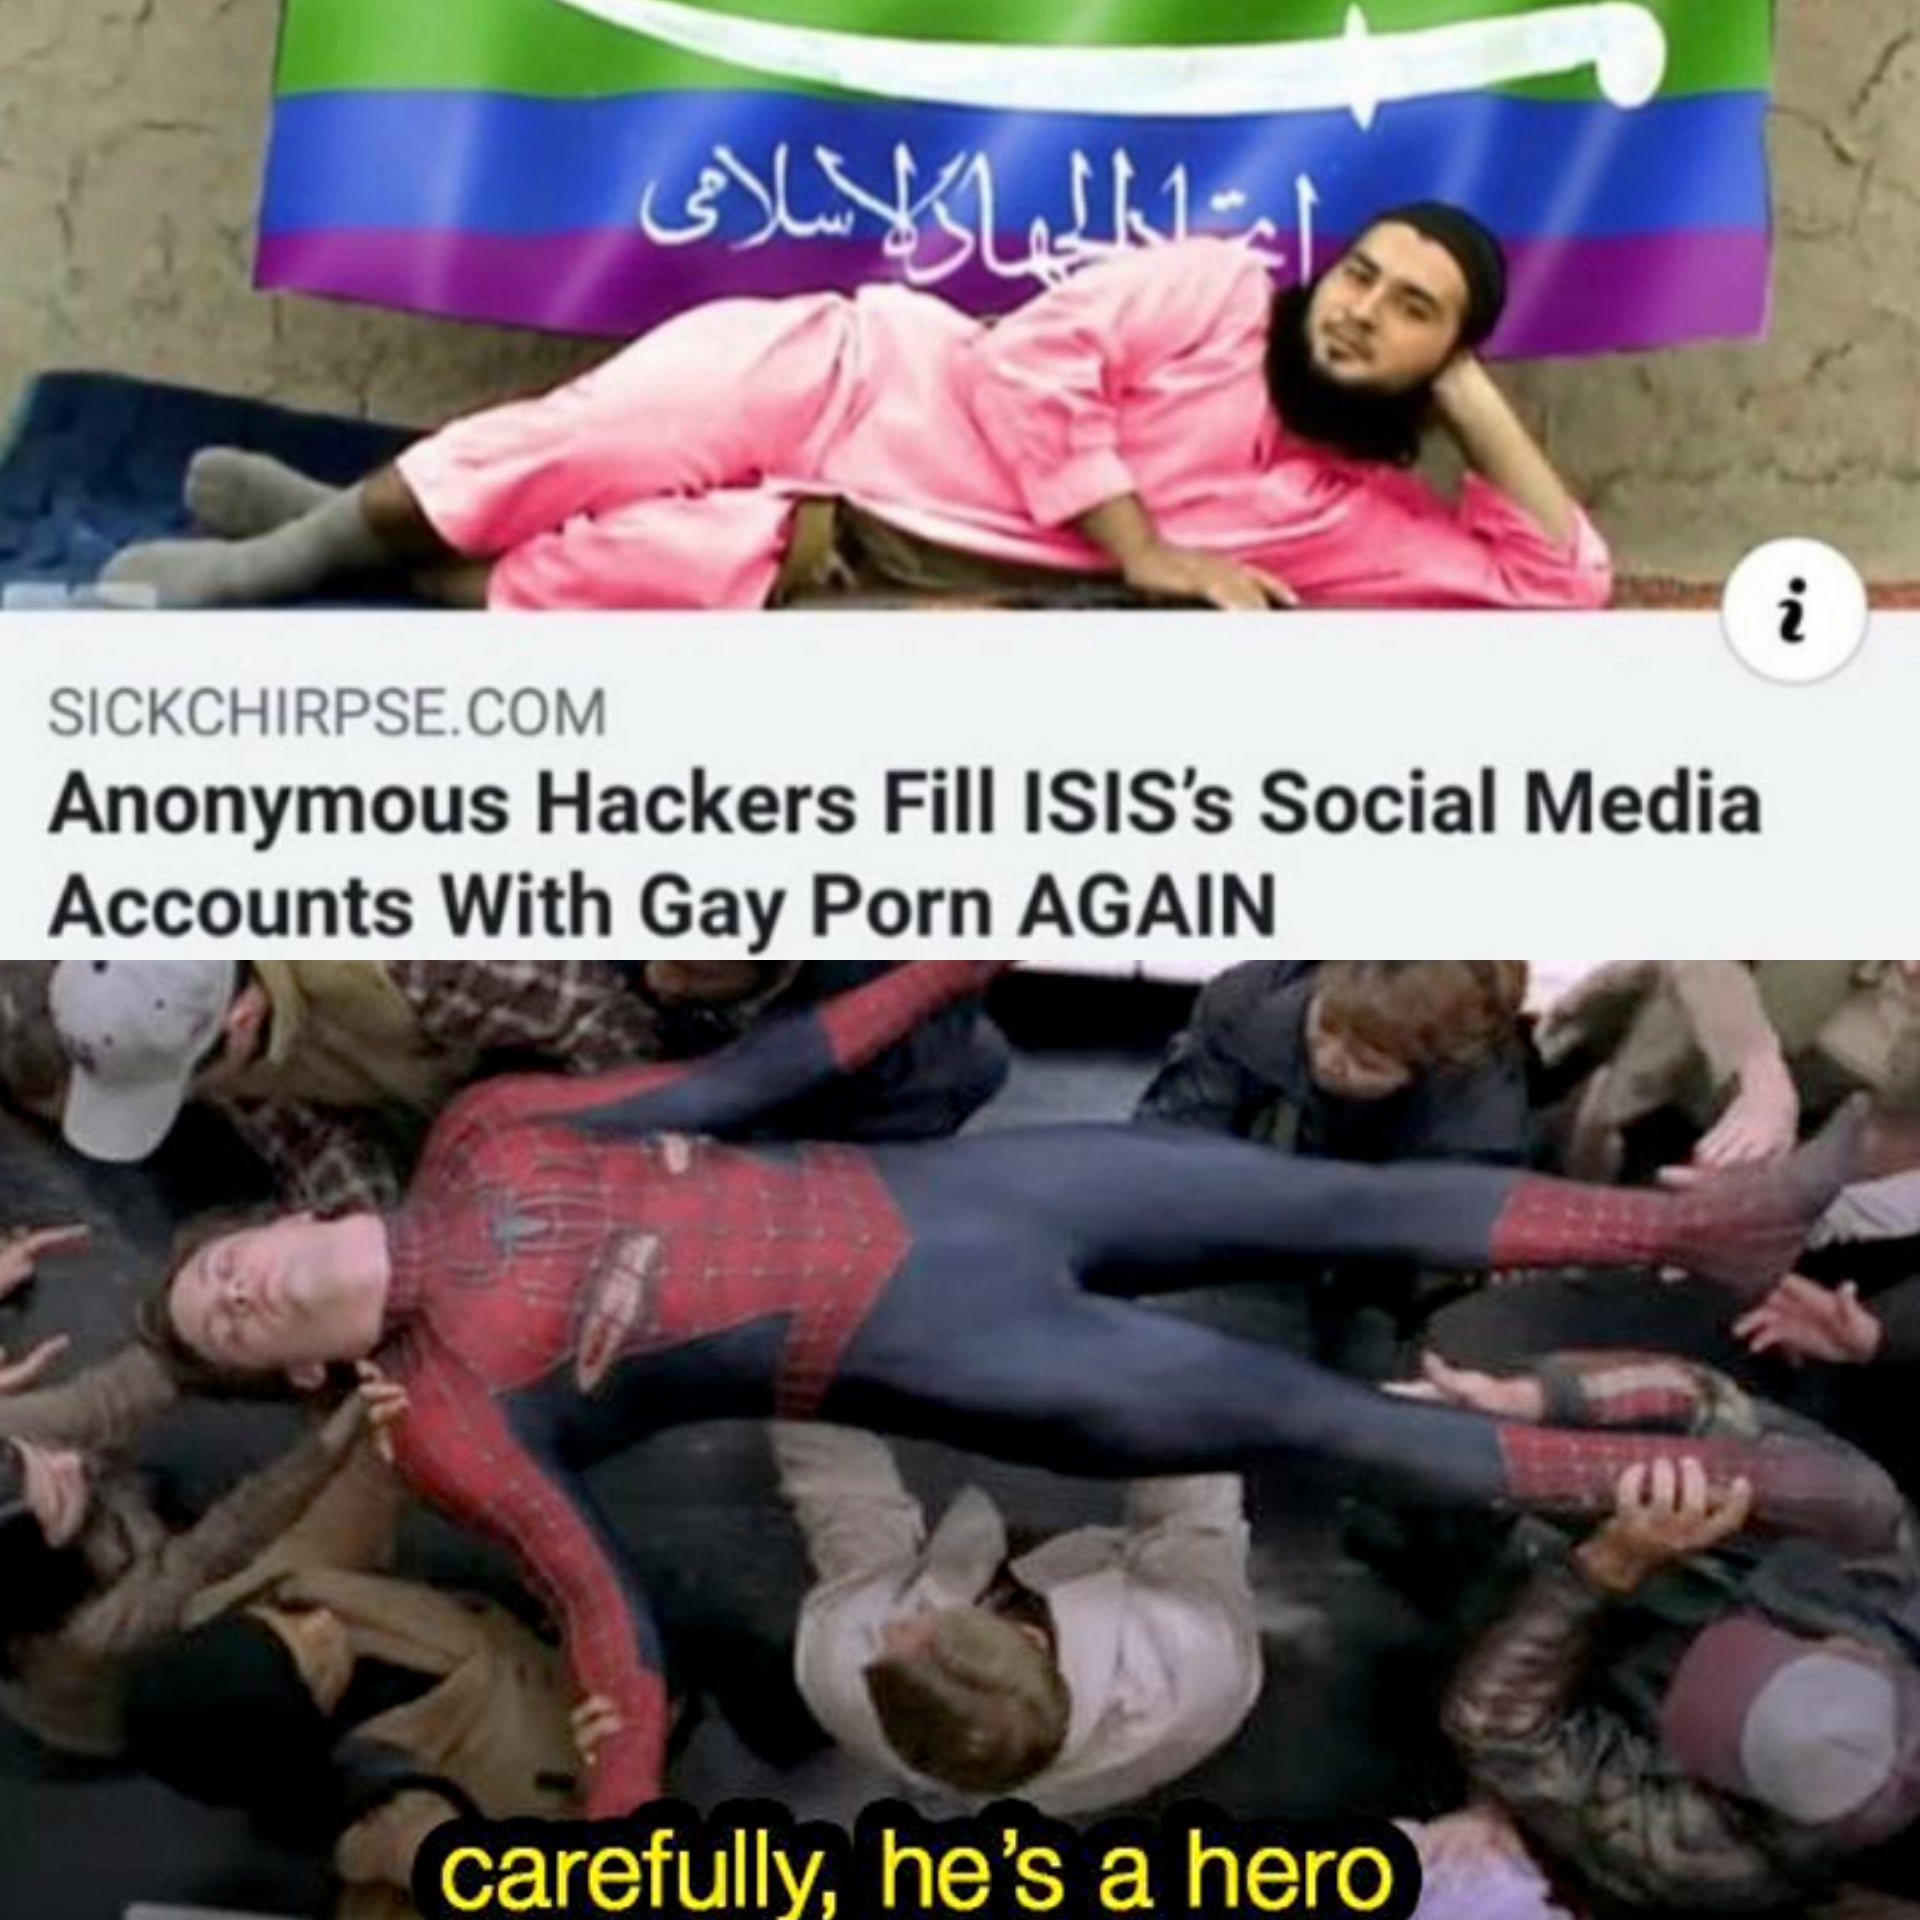 Meme - 'N Sickchirpse.Com Anonymous Hackers Fill Isis's Social Media Accounts With Gay Porn Again carefully, he's a hero